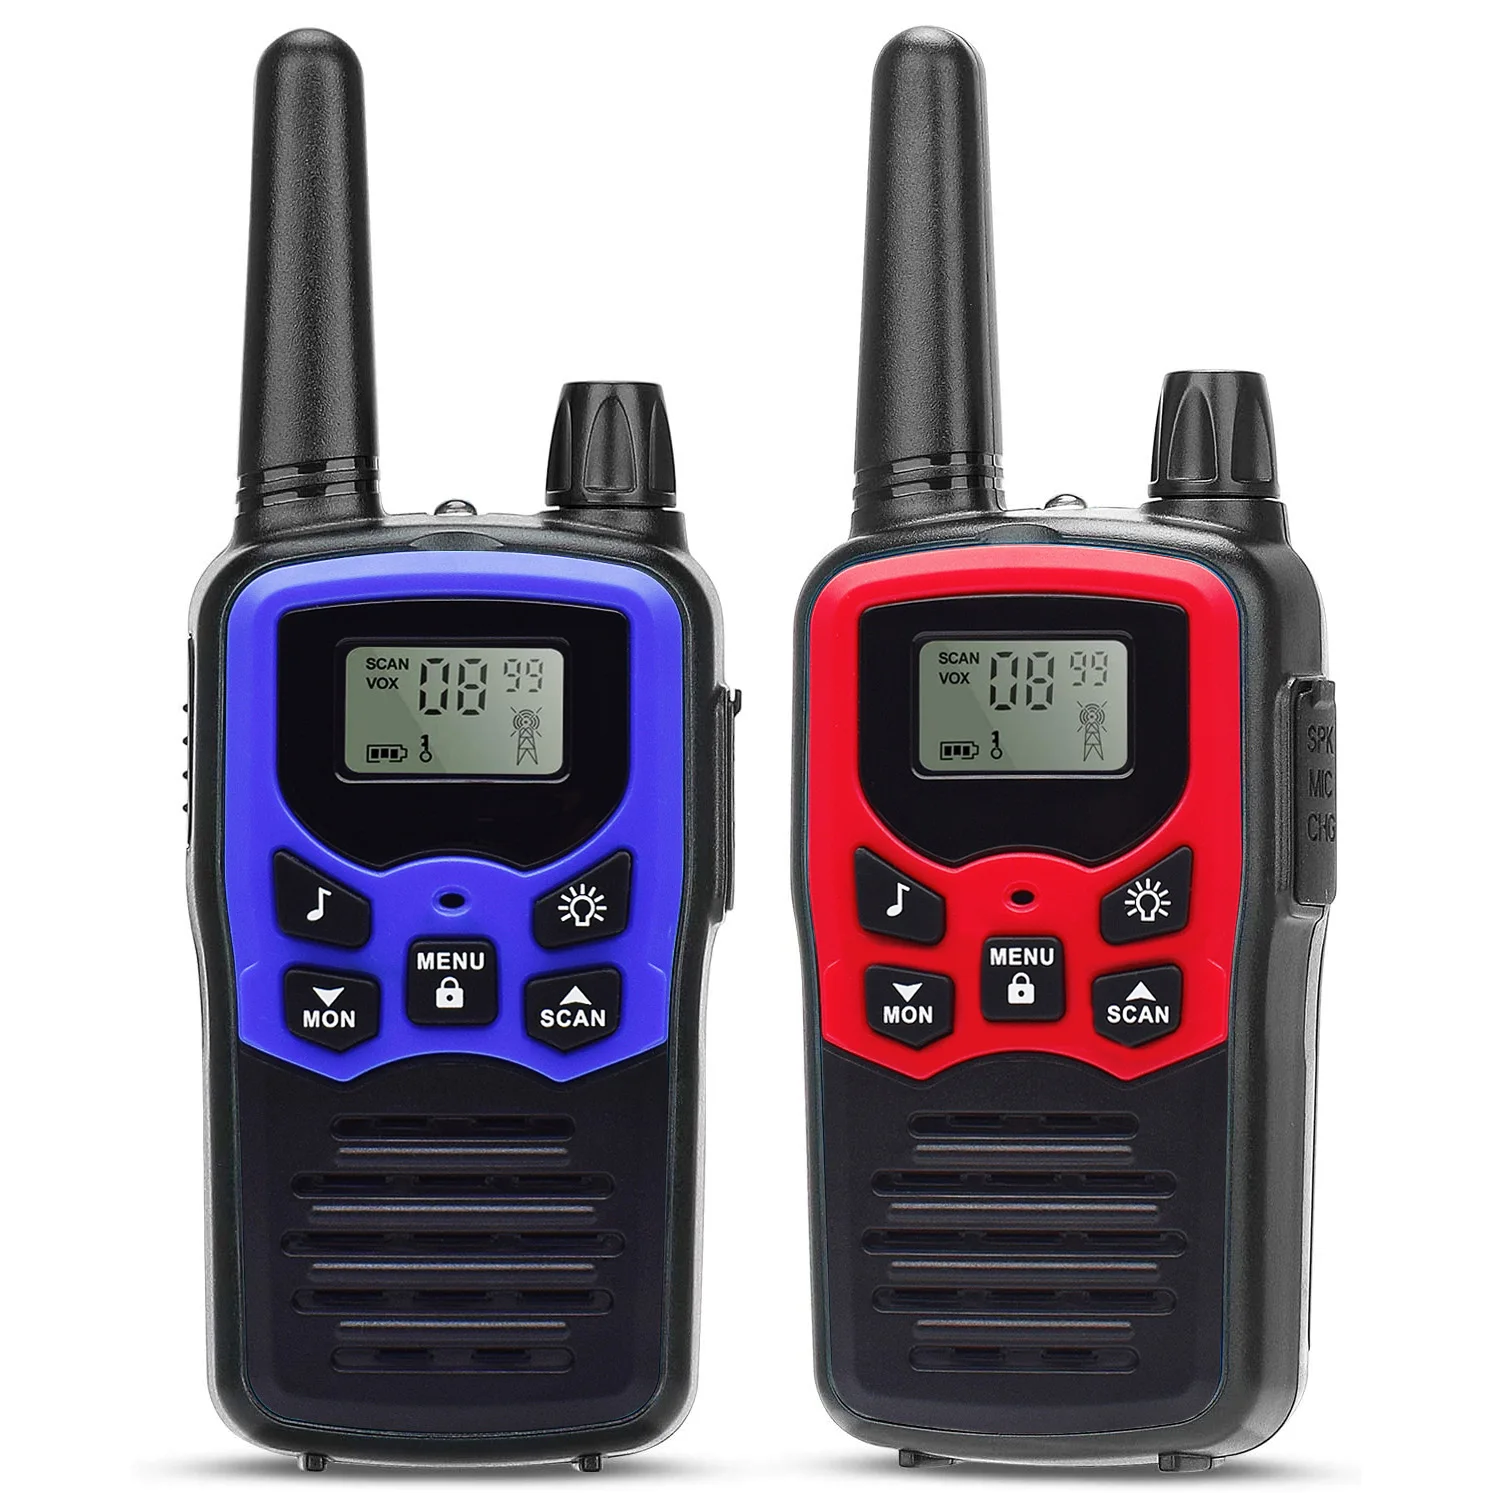 

Walkie Talkie Handheld Two Ways Portable Radio 9km Long Range Distance Hot Selling for Adult and Kids Toy in Flash Light, Diverse/customized